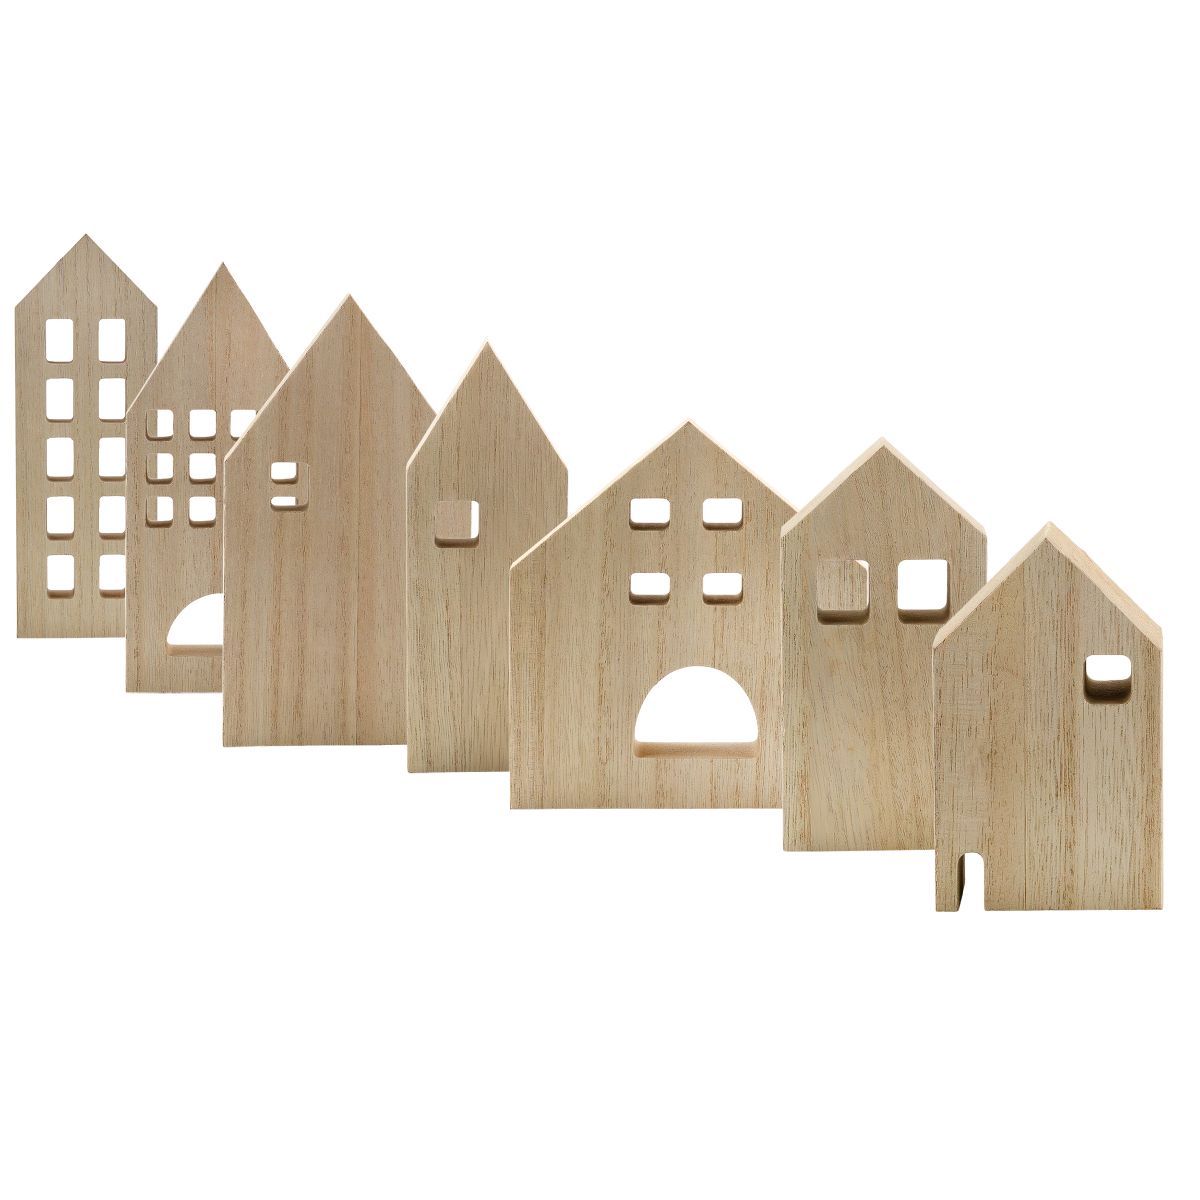 Auldhome Design- Wood House Silhouettes, Christmas Holiday Wood Cutout Figures Set of 7 | Target